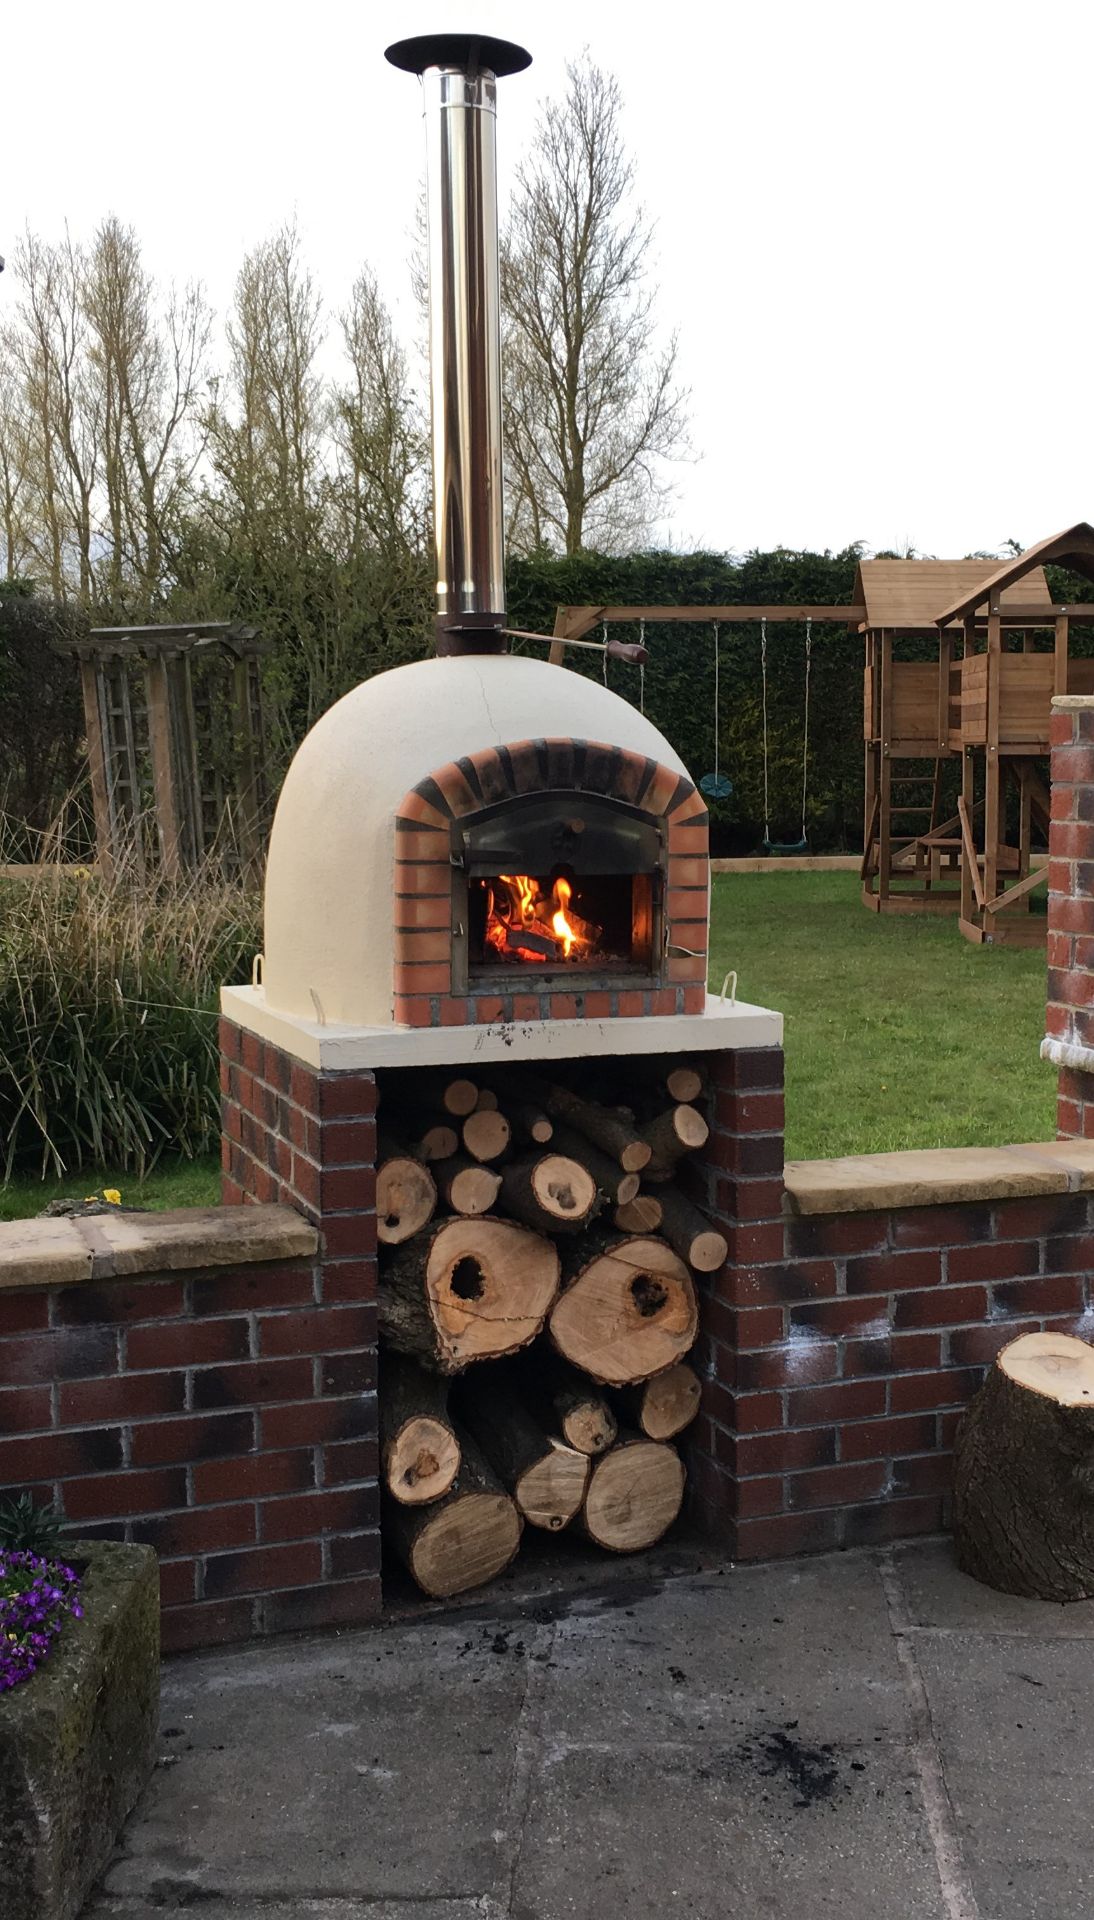 New Crated 90cm Traditional Hand Made, Wood Fired Brick Pizza Oven - Comes With Stainless Chimney - Image 2 of 2